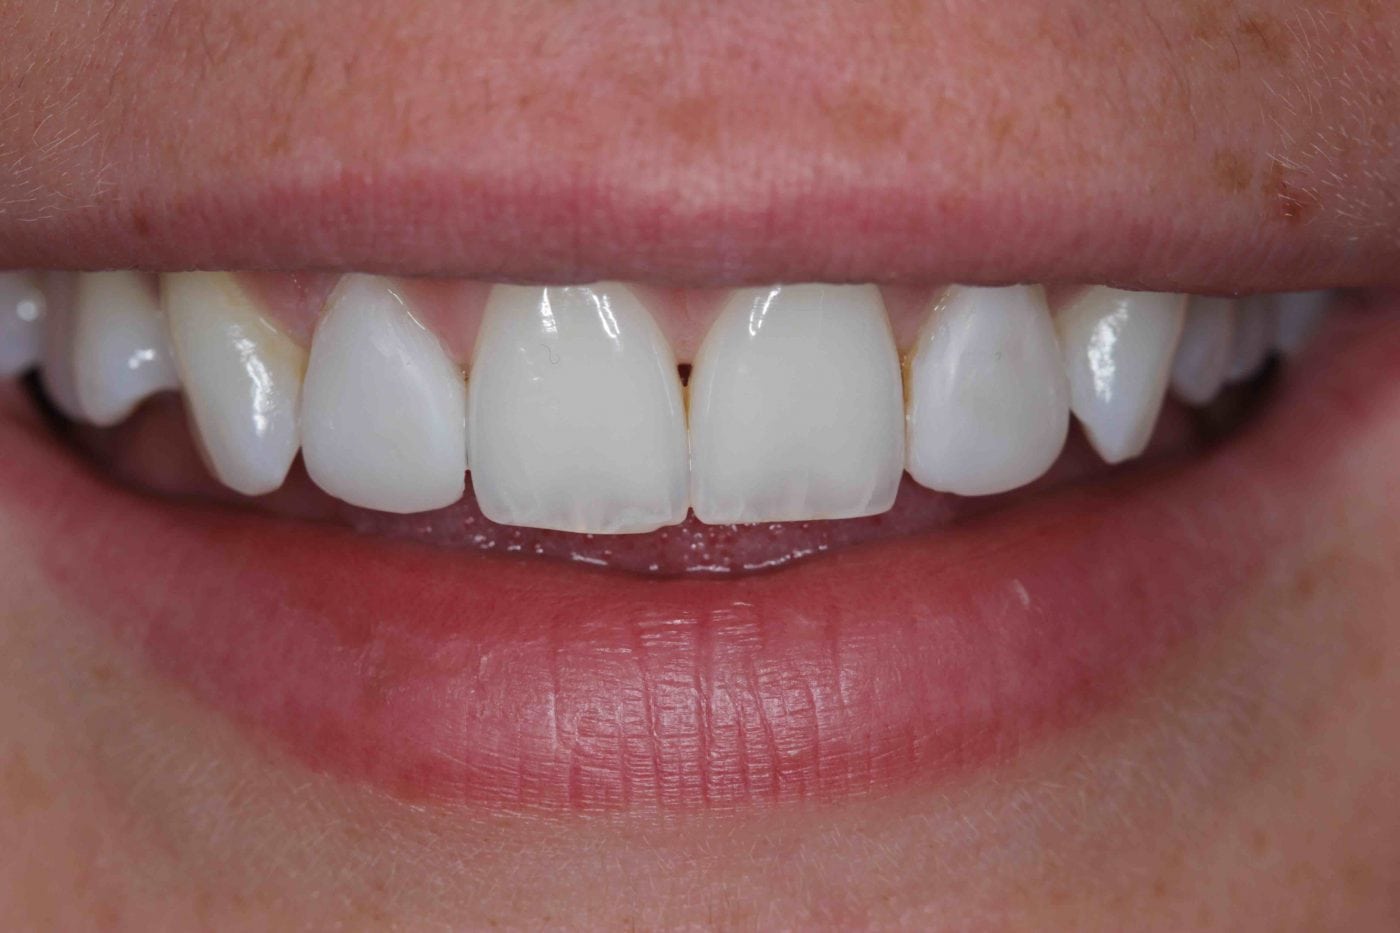 Before and After Dental Bonding Photos | Cosmetic Bonding Dentists